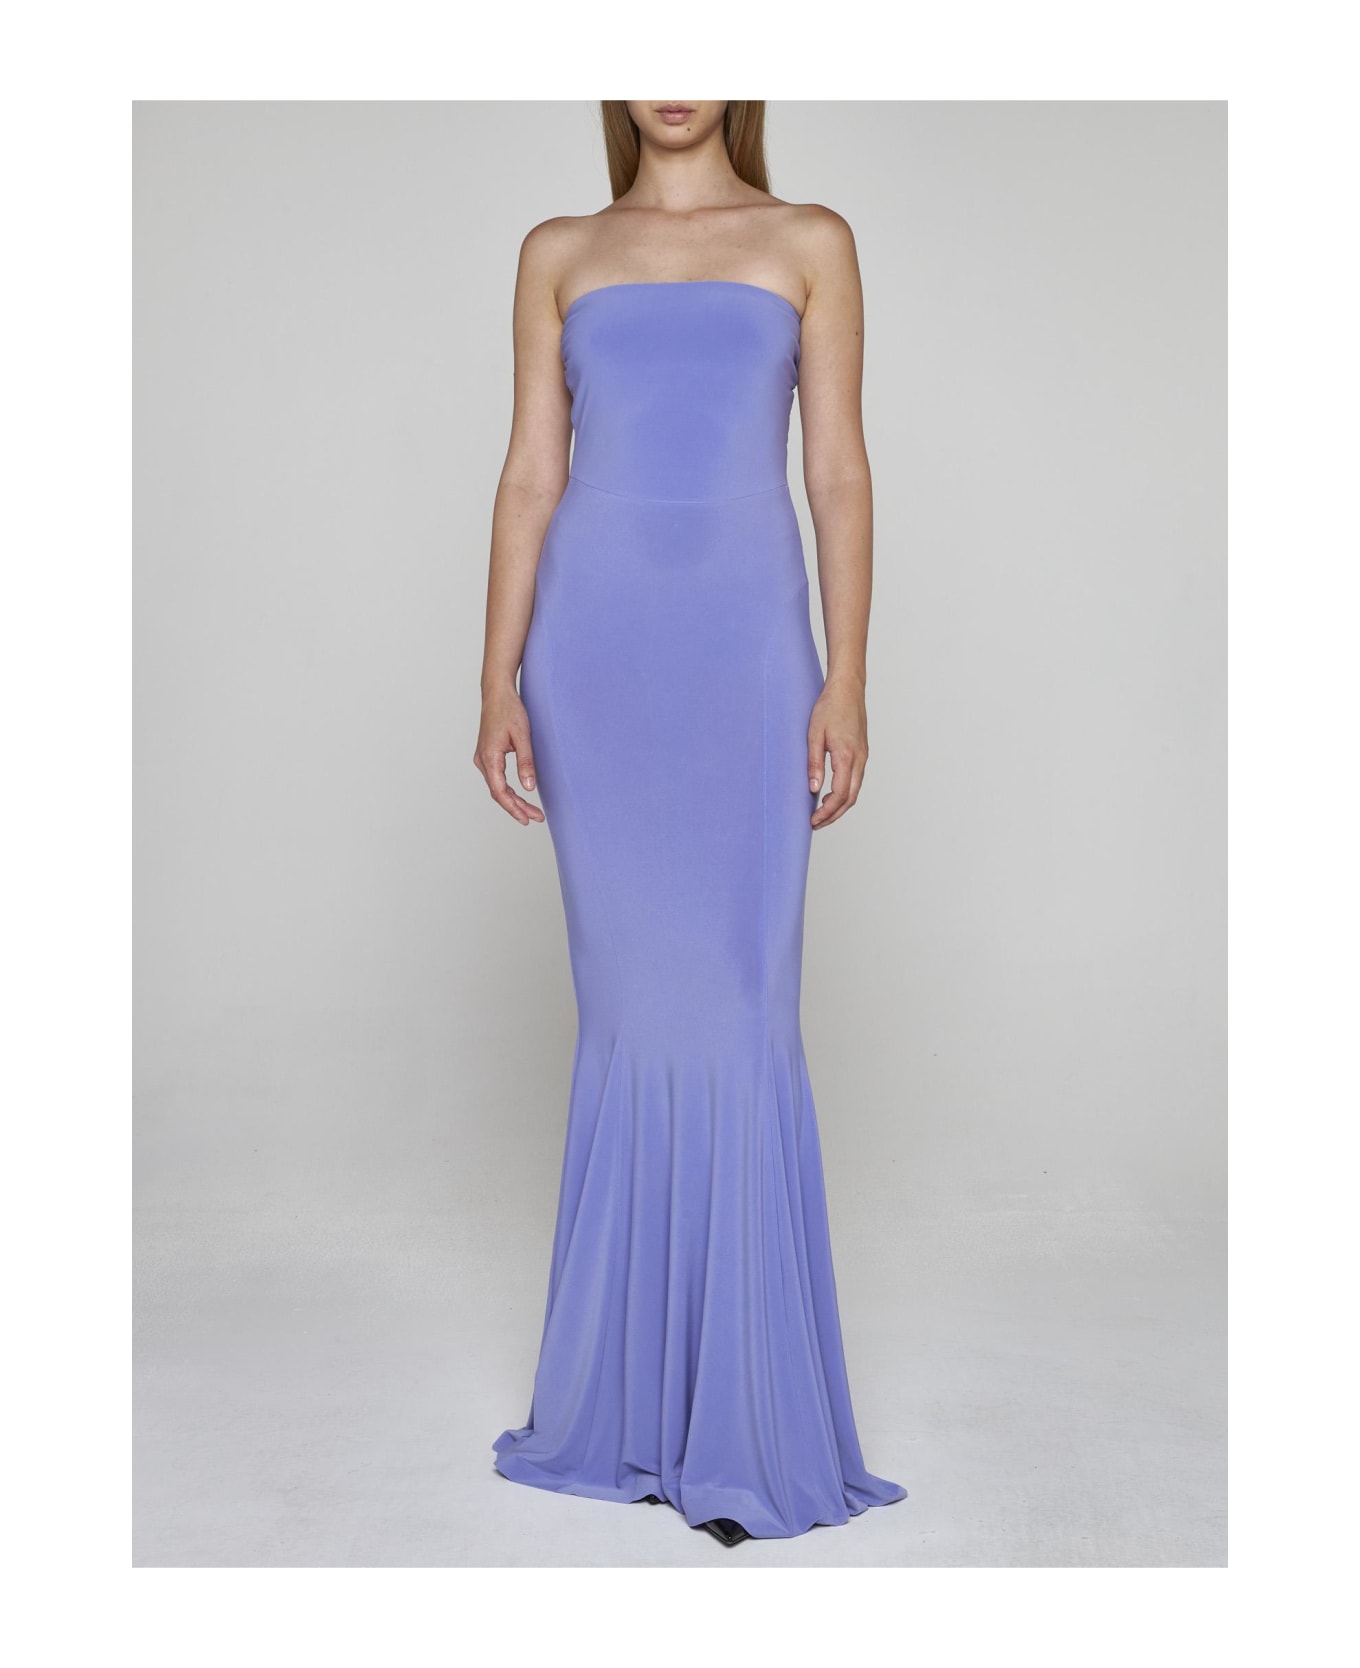 Norma Kamali Strapless Jersey Fishtail Gown - Lilac